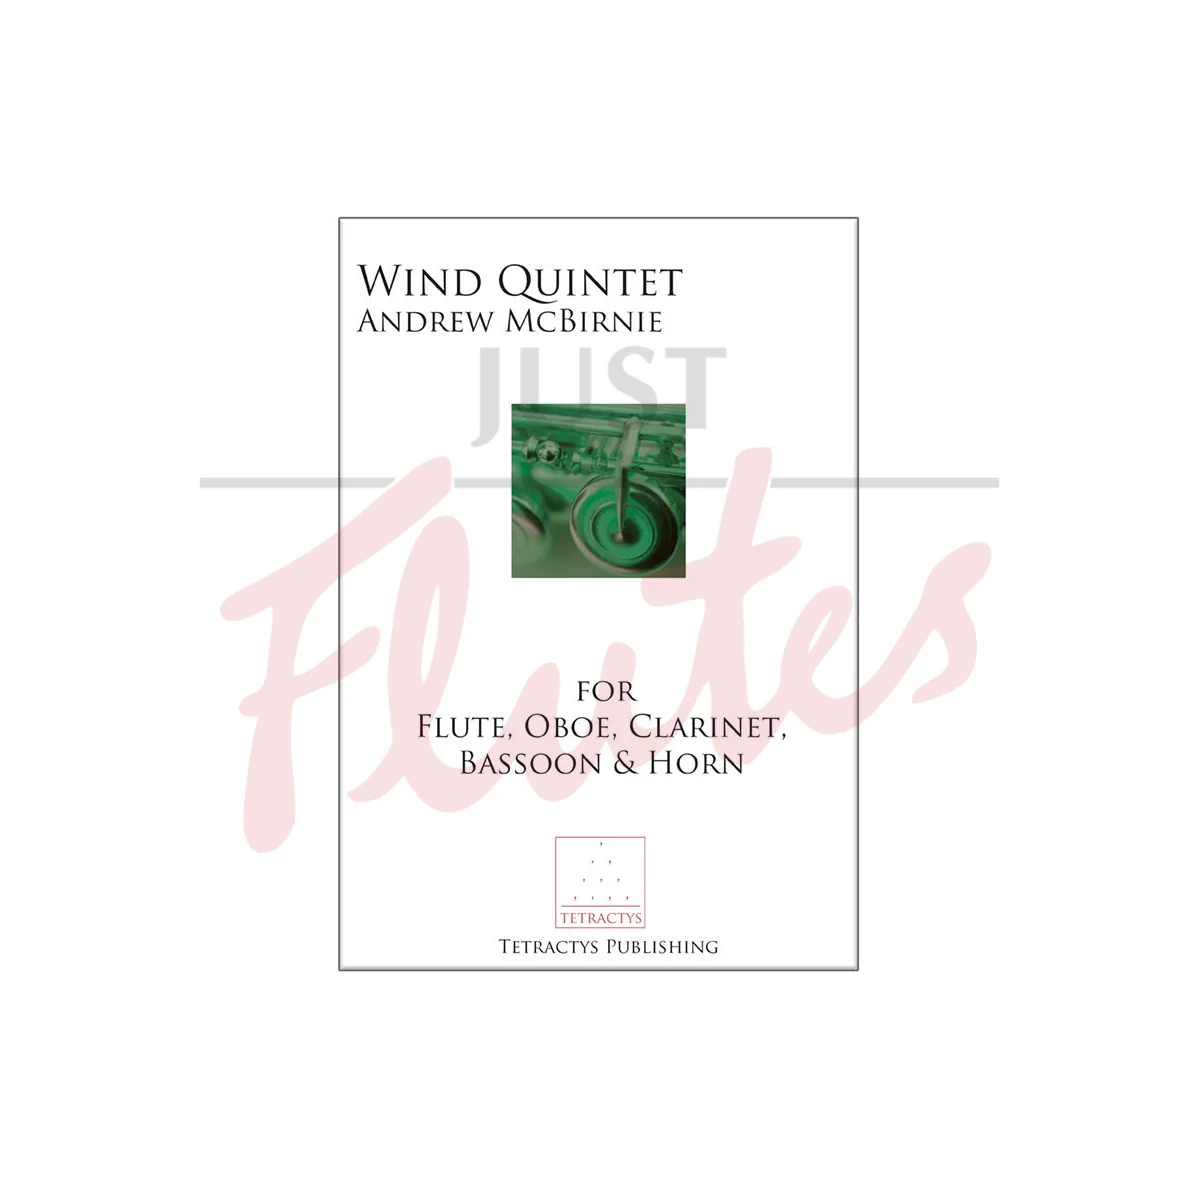 Wind Quintet for Flute, Oboe, Clarinet, Bassoon and Horn